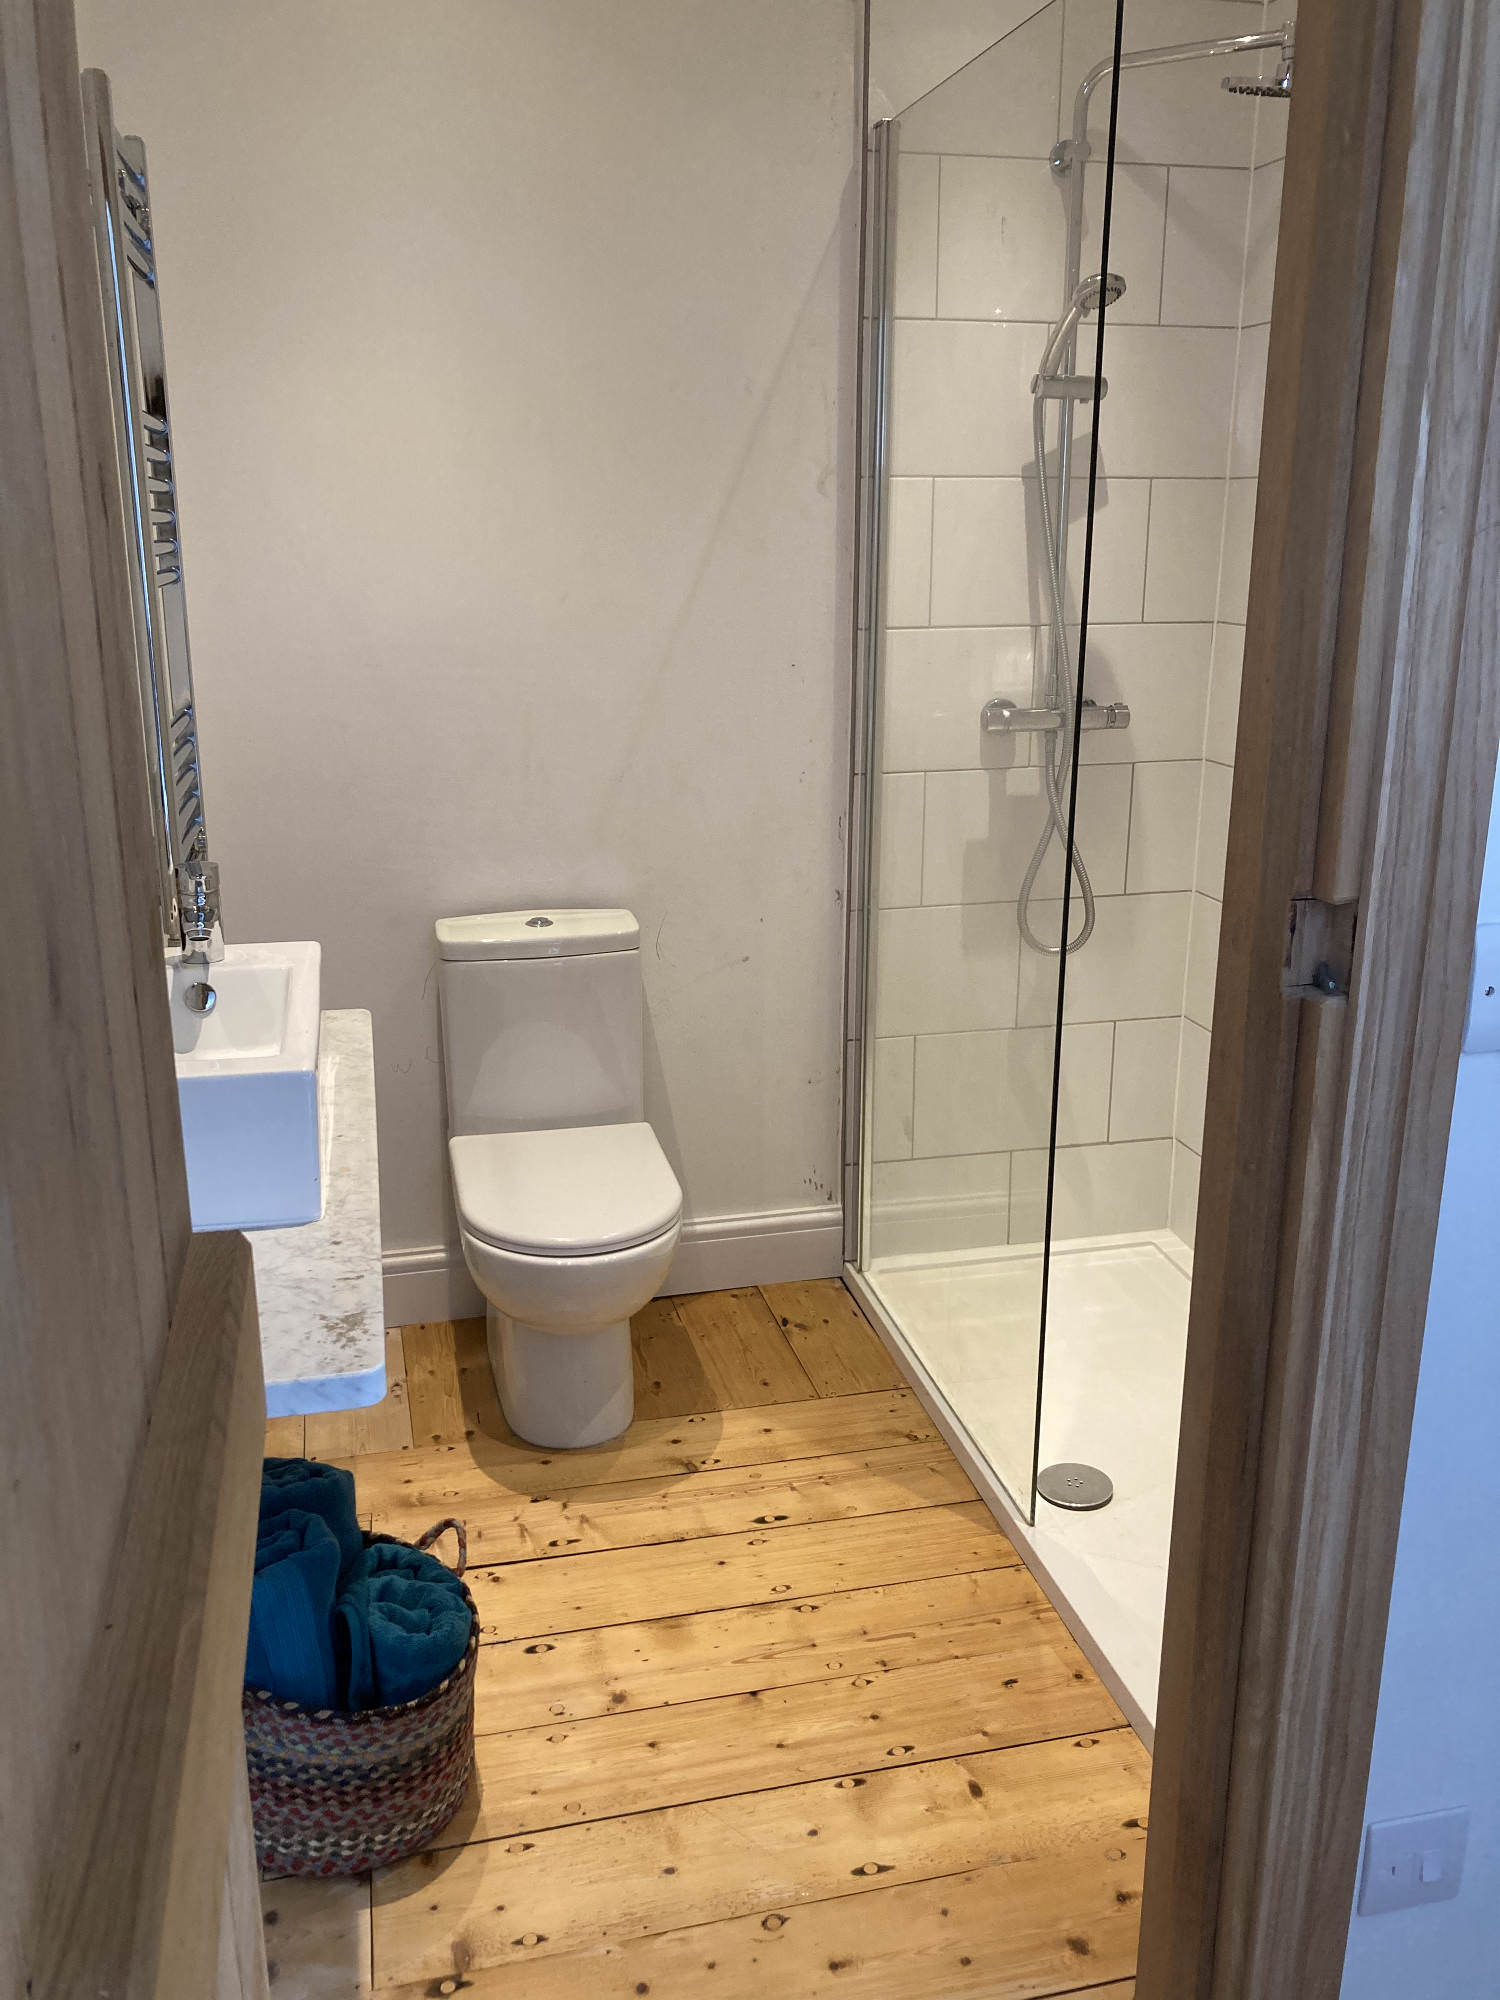 Image showing a shower room and toilet.